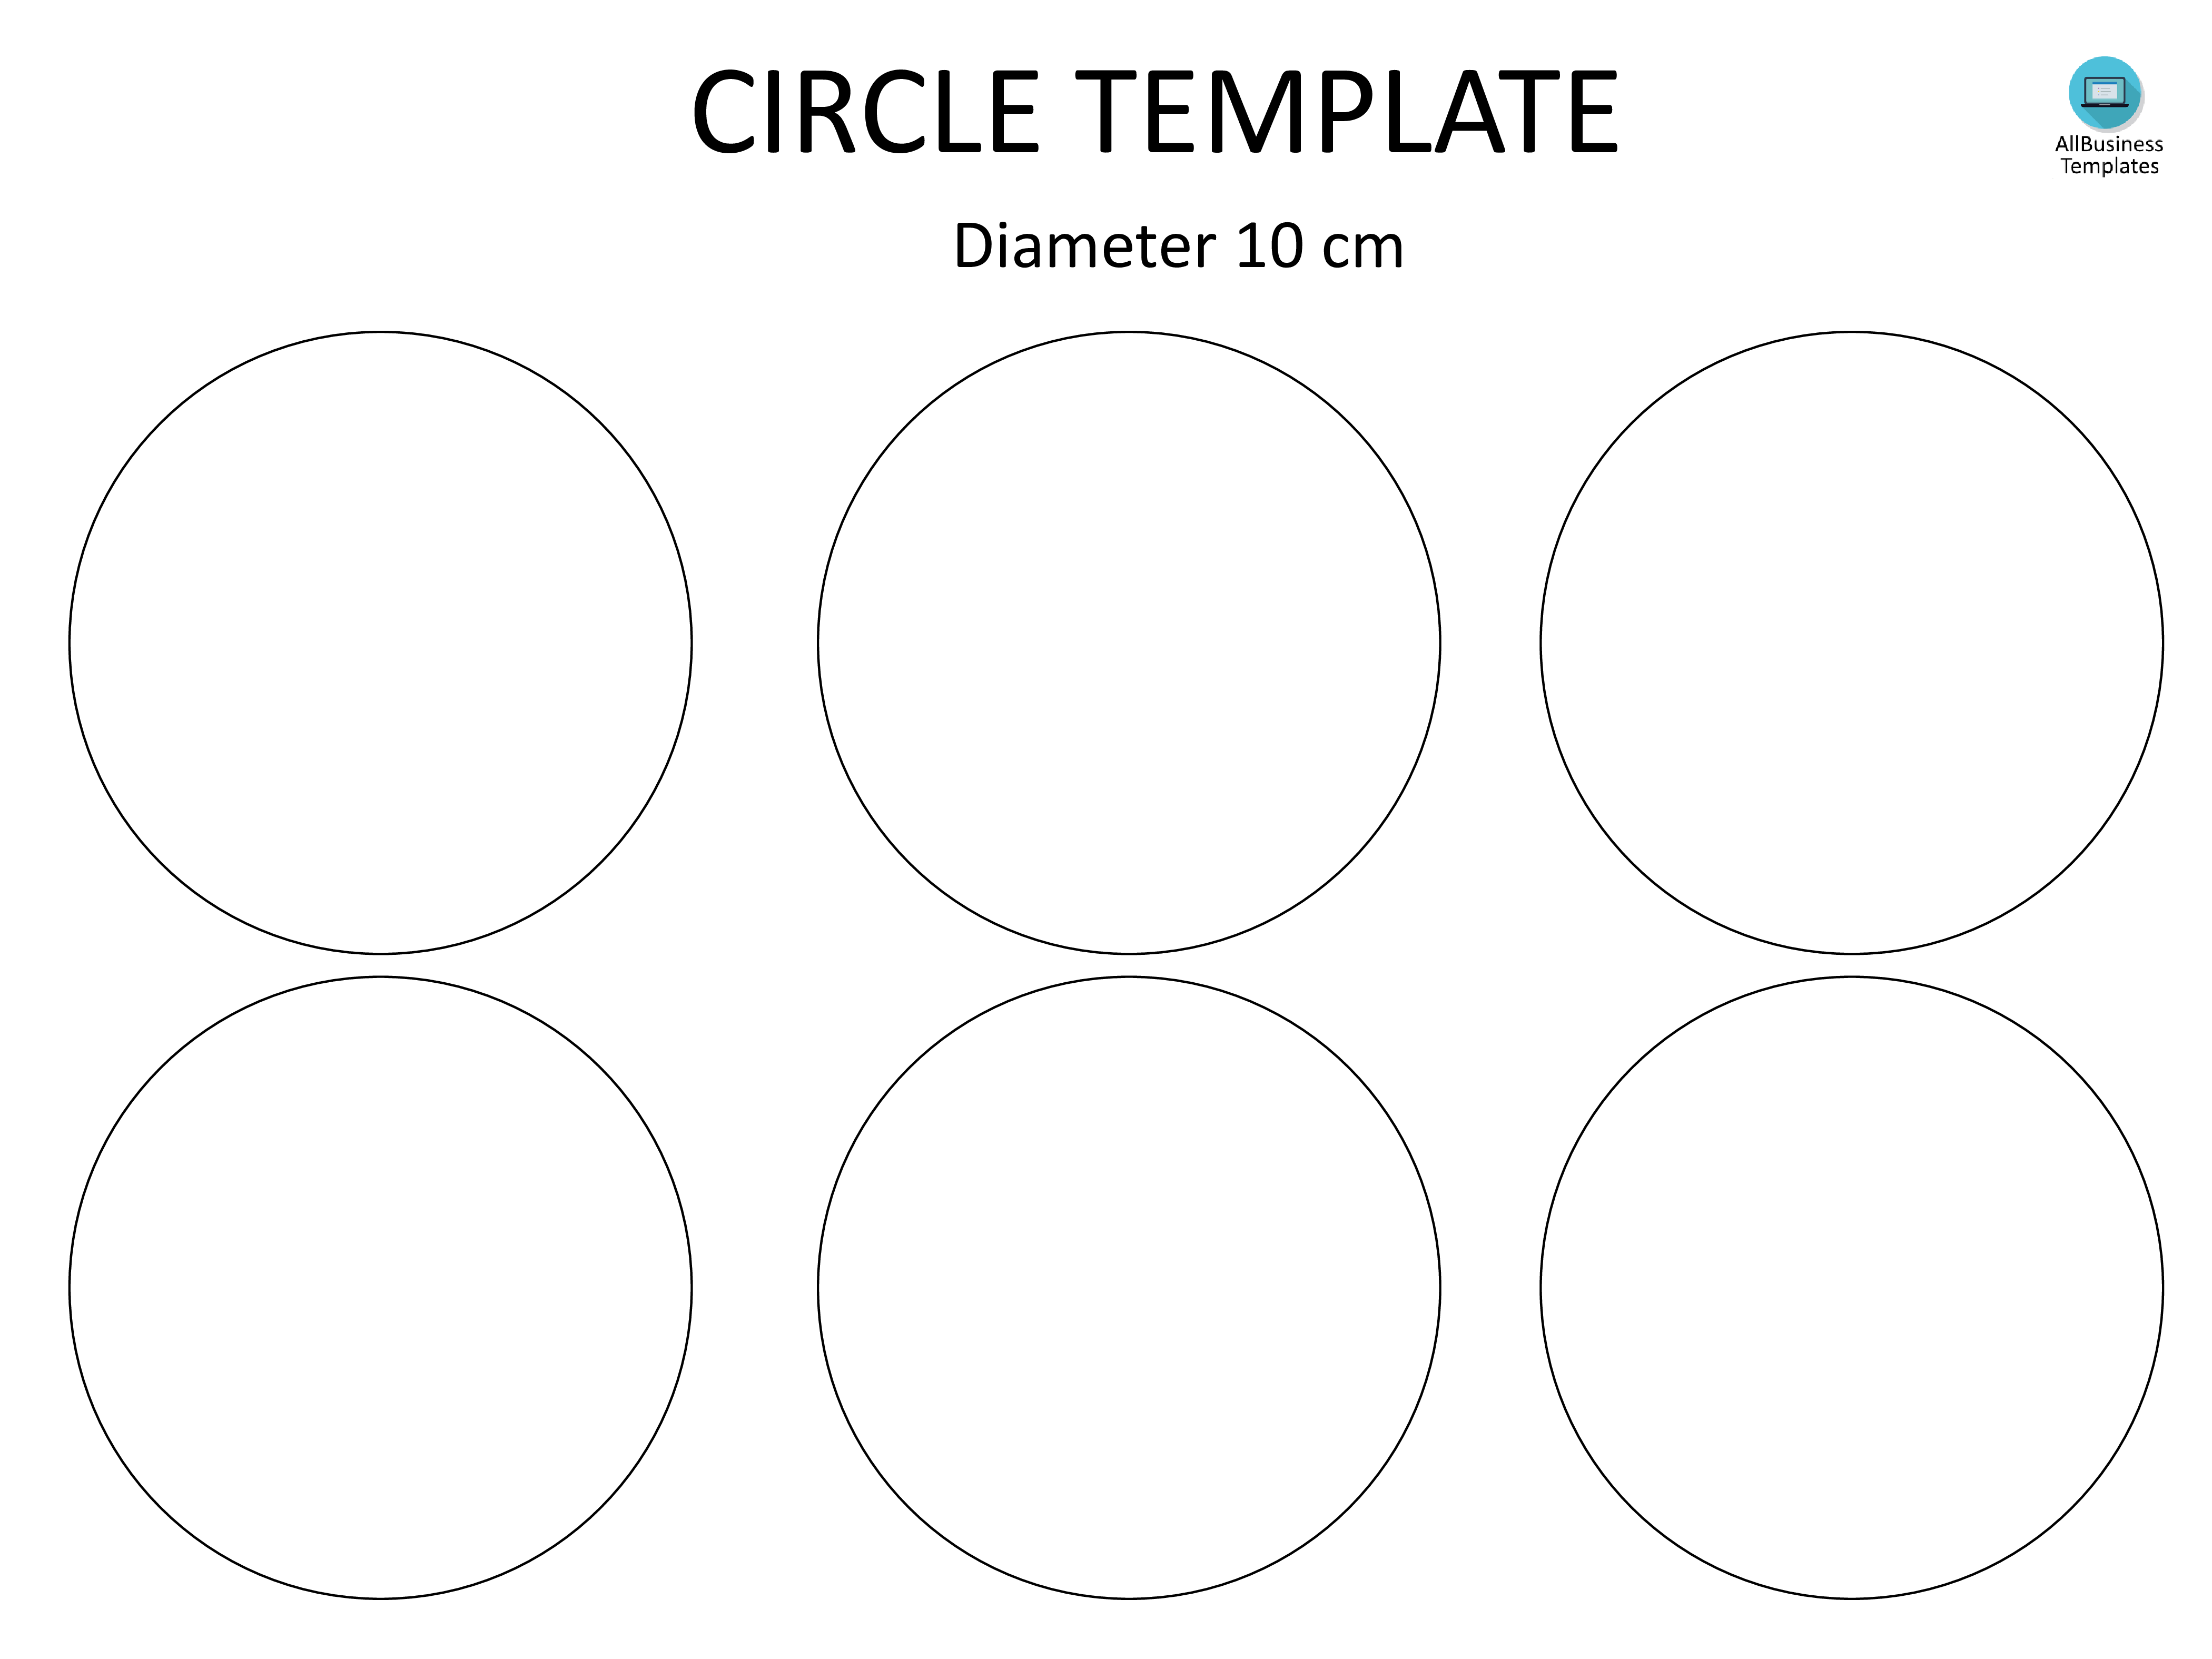 Circle template with 10cm diameter Templates at